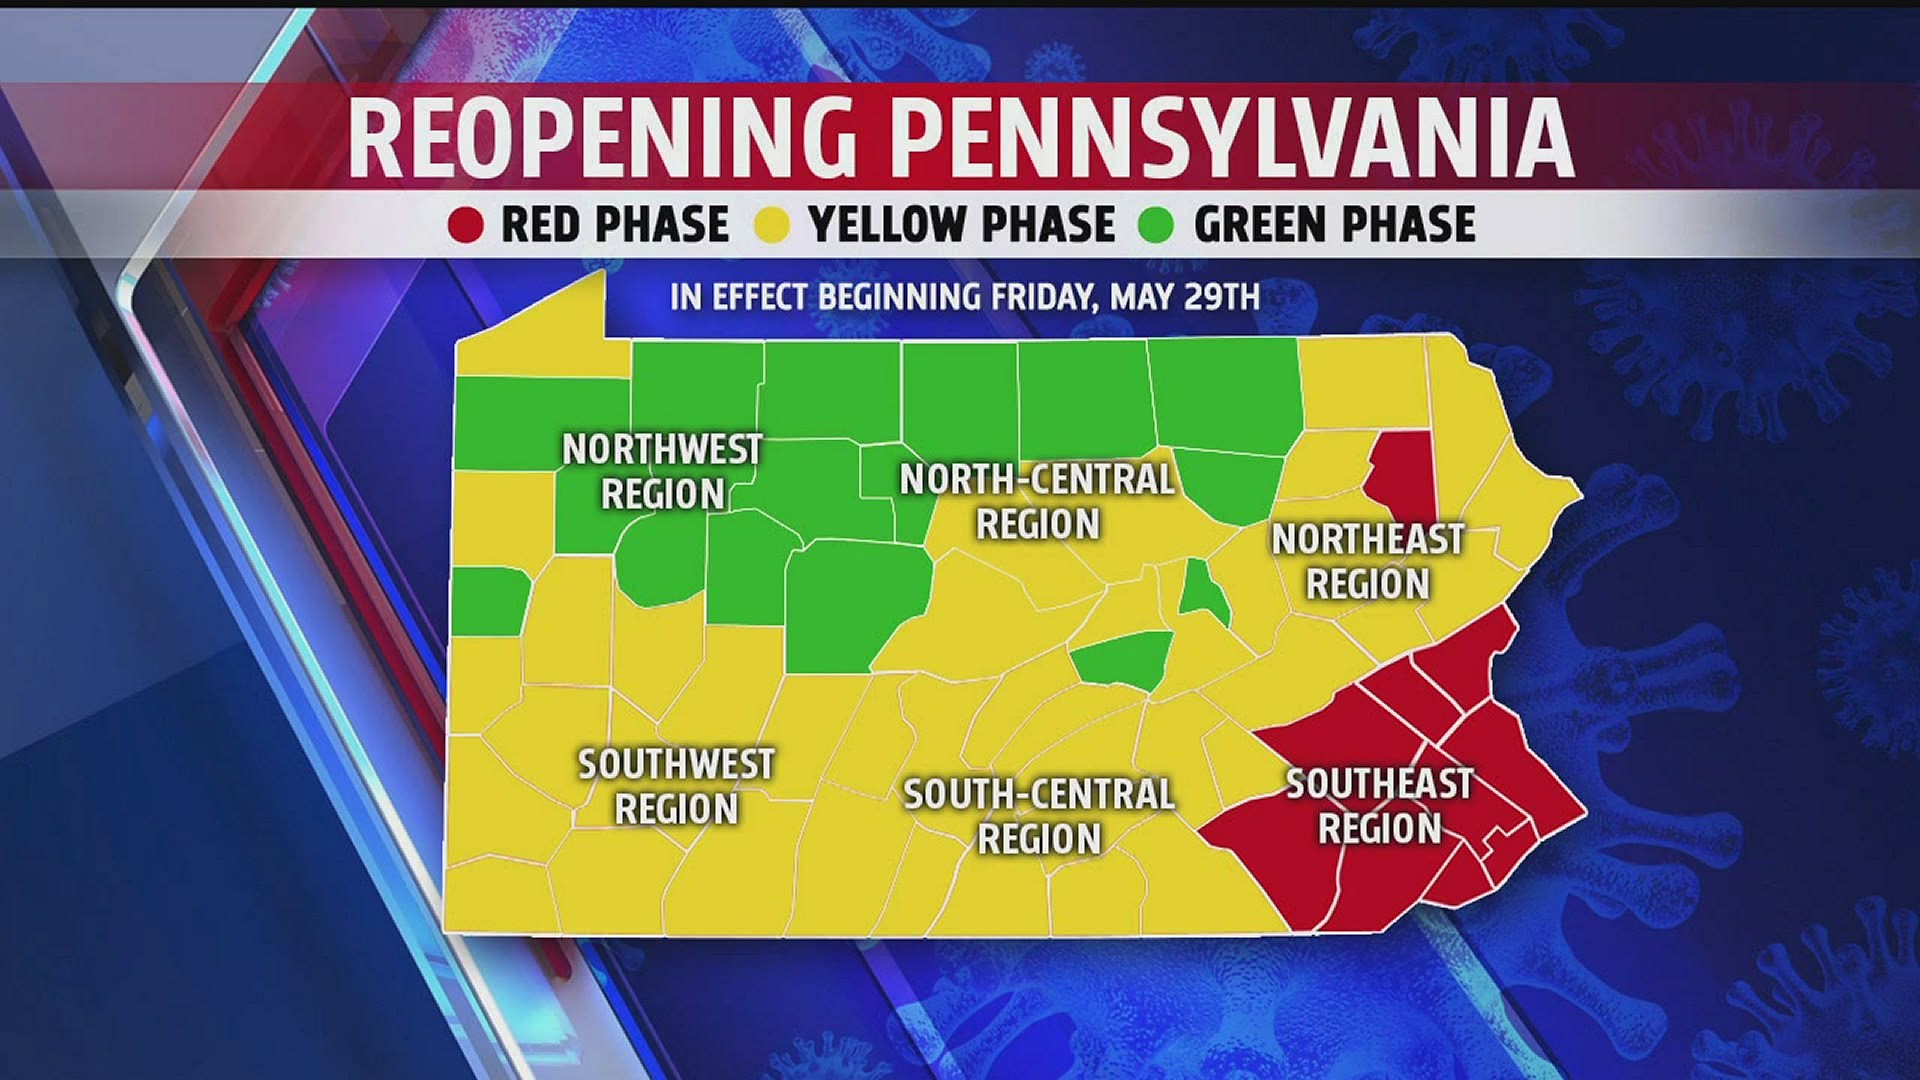 On Friday, May 29, Dauphin, Franklin, Huntington, Lebanon, Luzerne, Monroe, Pike and Schuylkill Counties will move into the Yellow Phase of reopening.